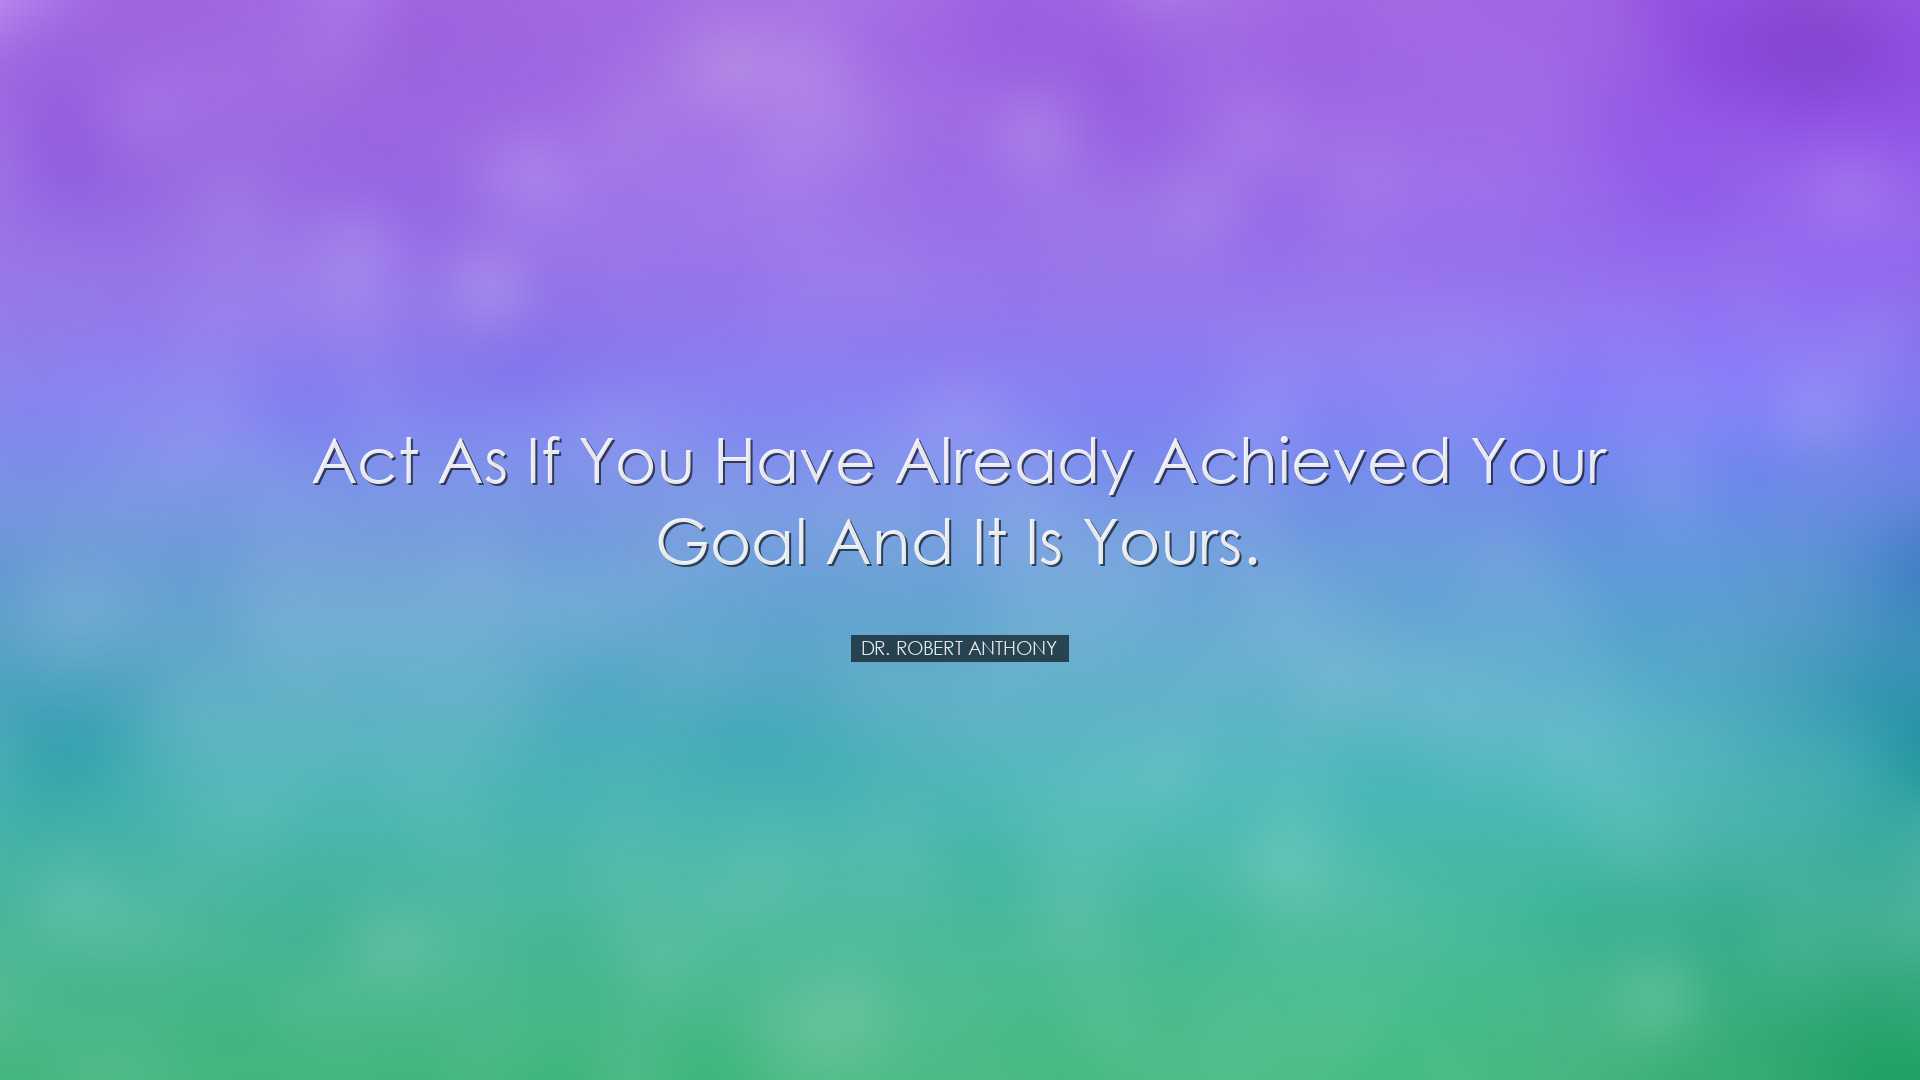 Act as if you have already achieved your goal and it is yours. - D